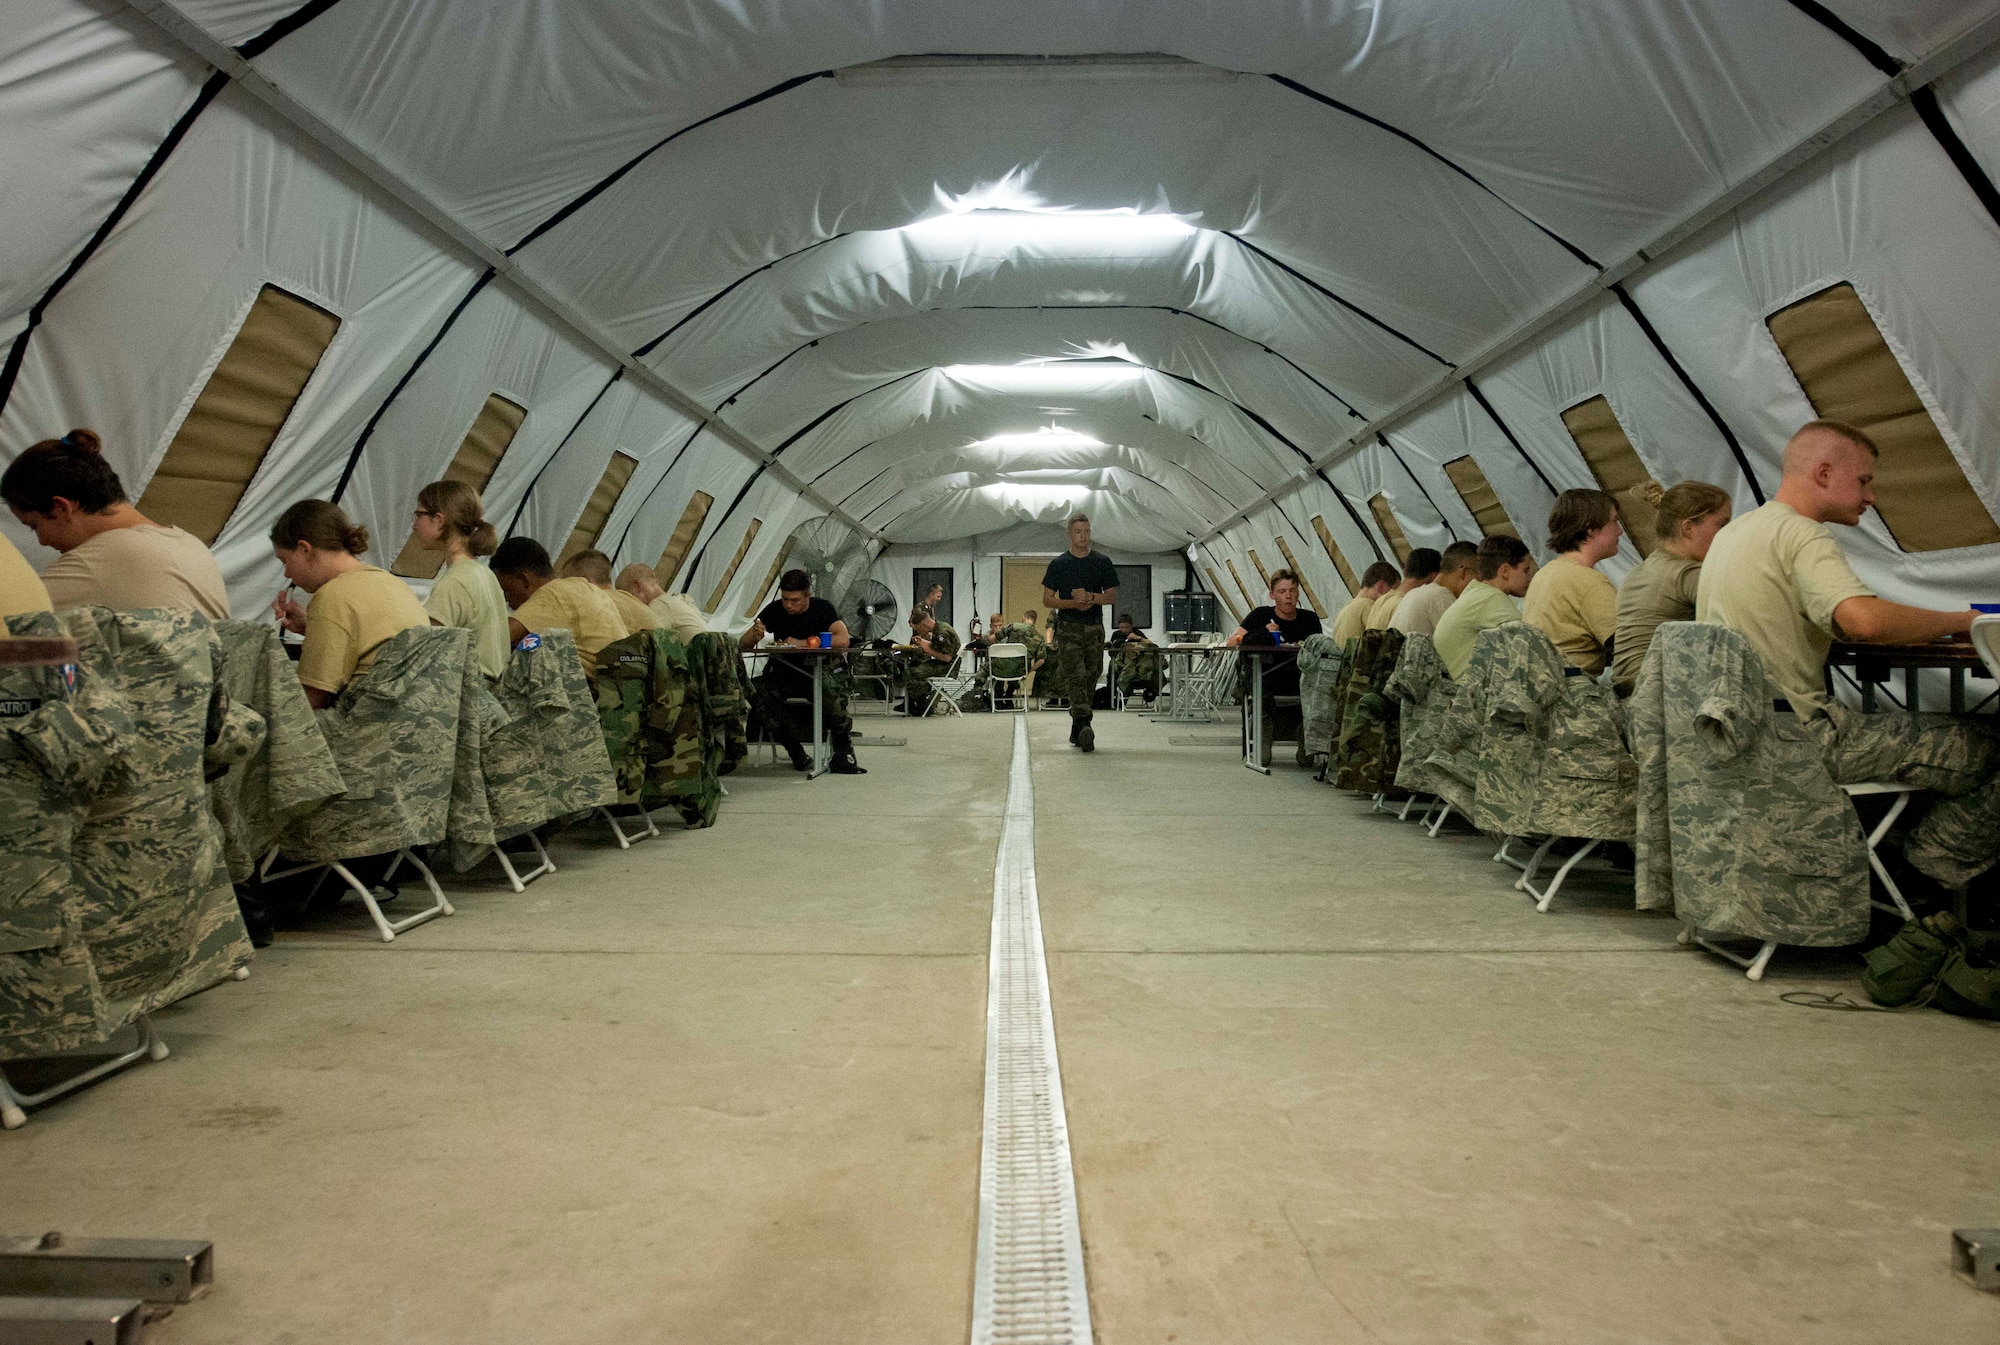 Cadets eat in a deployment tent during the Civil Air Patrol European Encampment on Ramstein Air Base, Germany, June 19, 2017. Instead of sleeping in and enjoying a lazy week of summer, cadets chose to better themselves by practicing leadership, increasing knowledge and building physical fitness in a military setting. (U.S. Air Force photo by Senior Airman Elizabeth Baker)